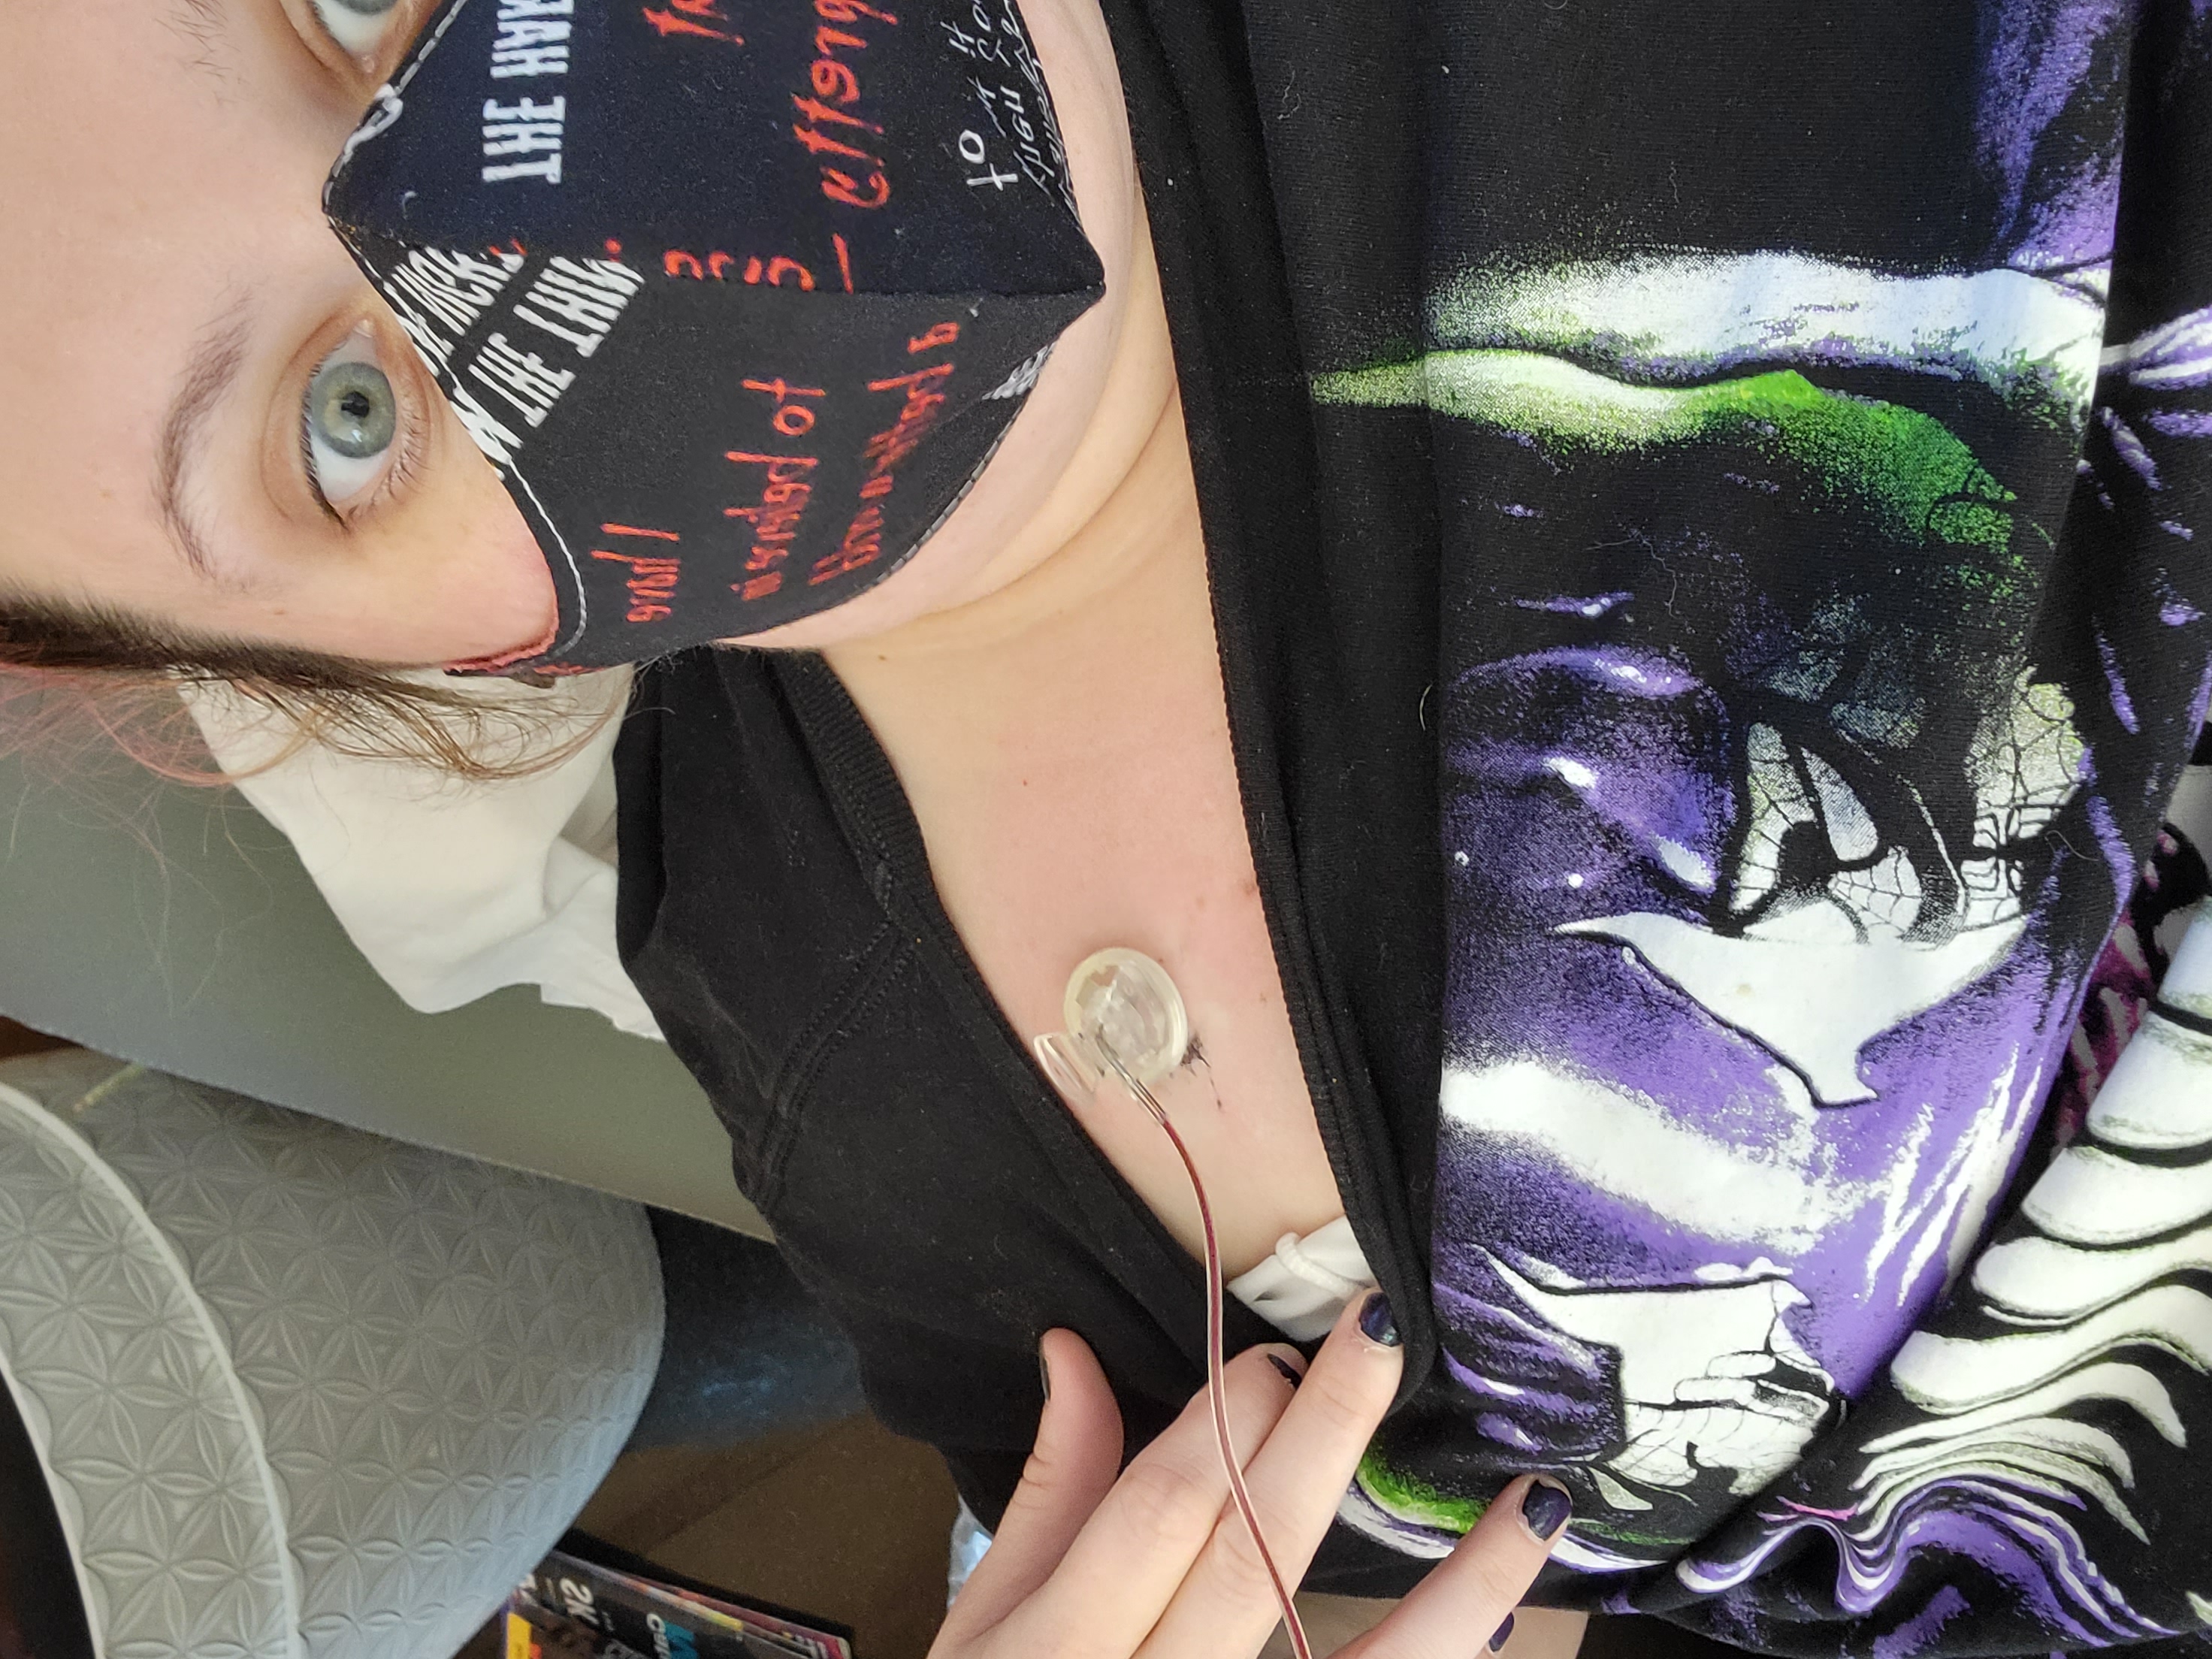 A cancer patient wearing a mask and a blakc and purple shirt, pulling her shirt down just enough to show off her accessed port.